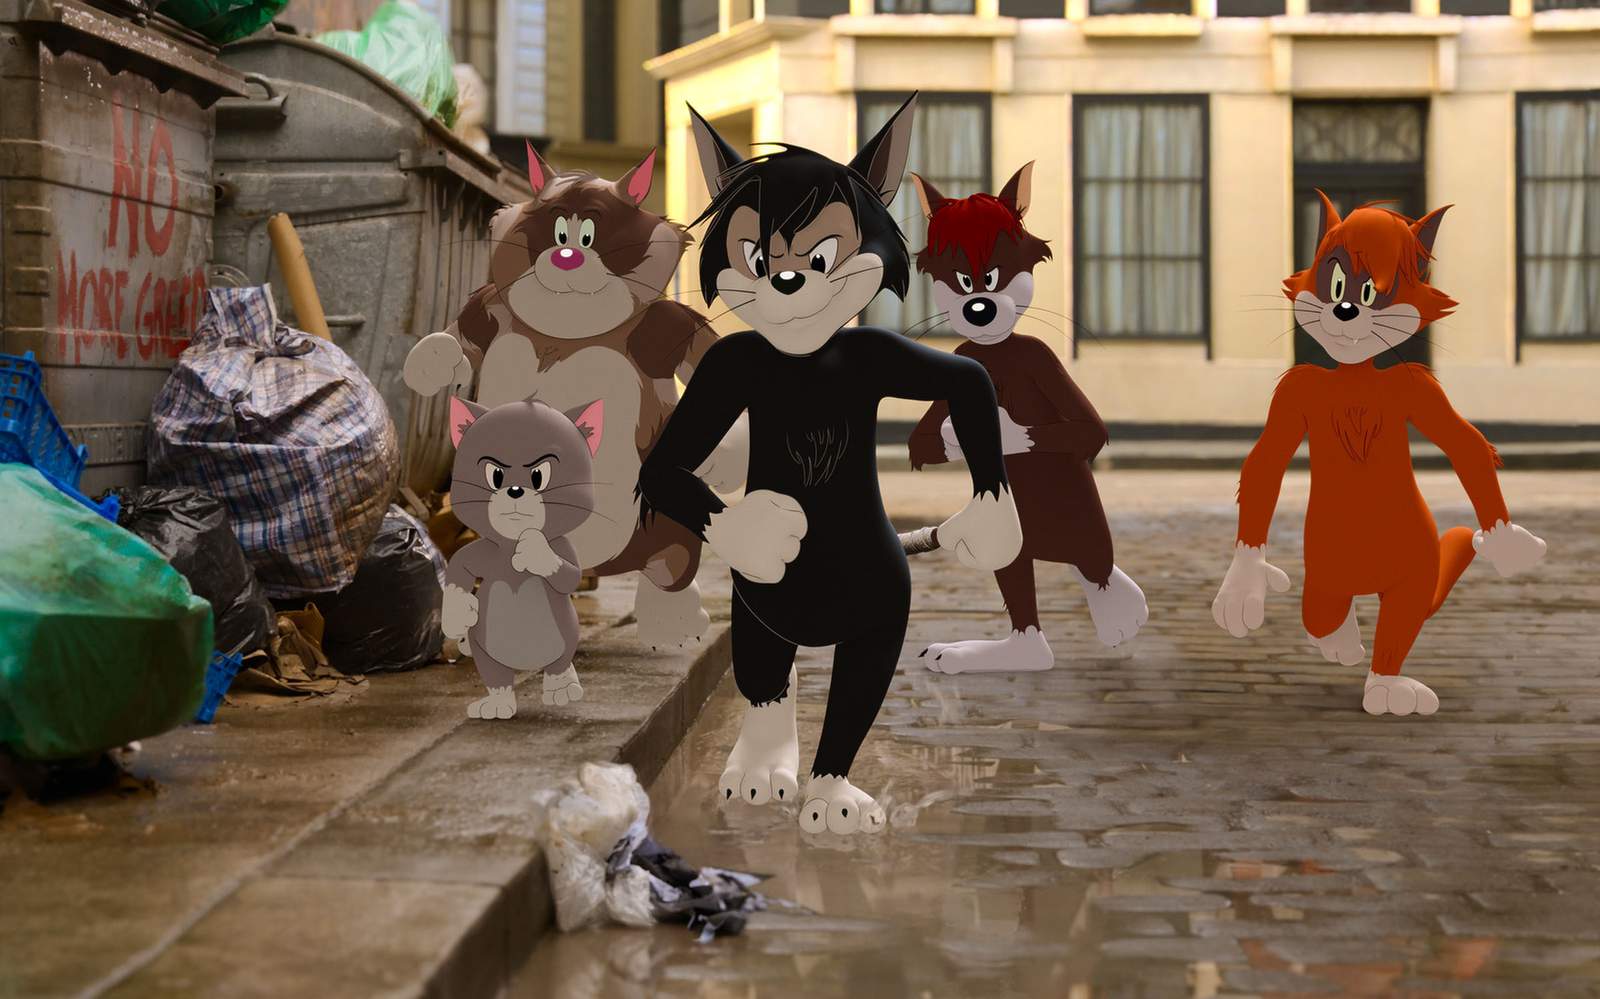 'Tom & Jerry' gives box office some life with $13.7M opening